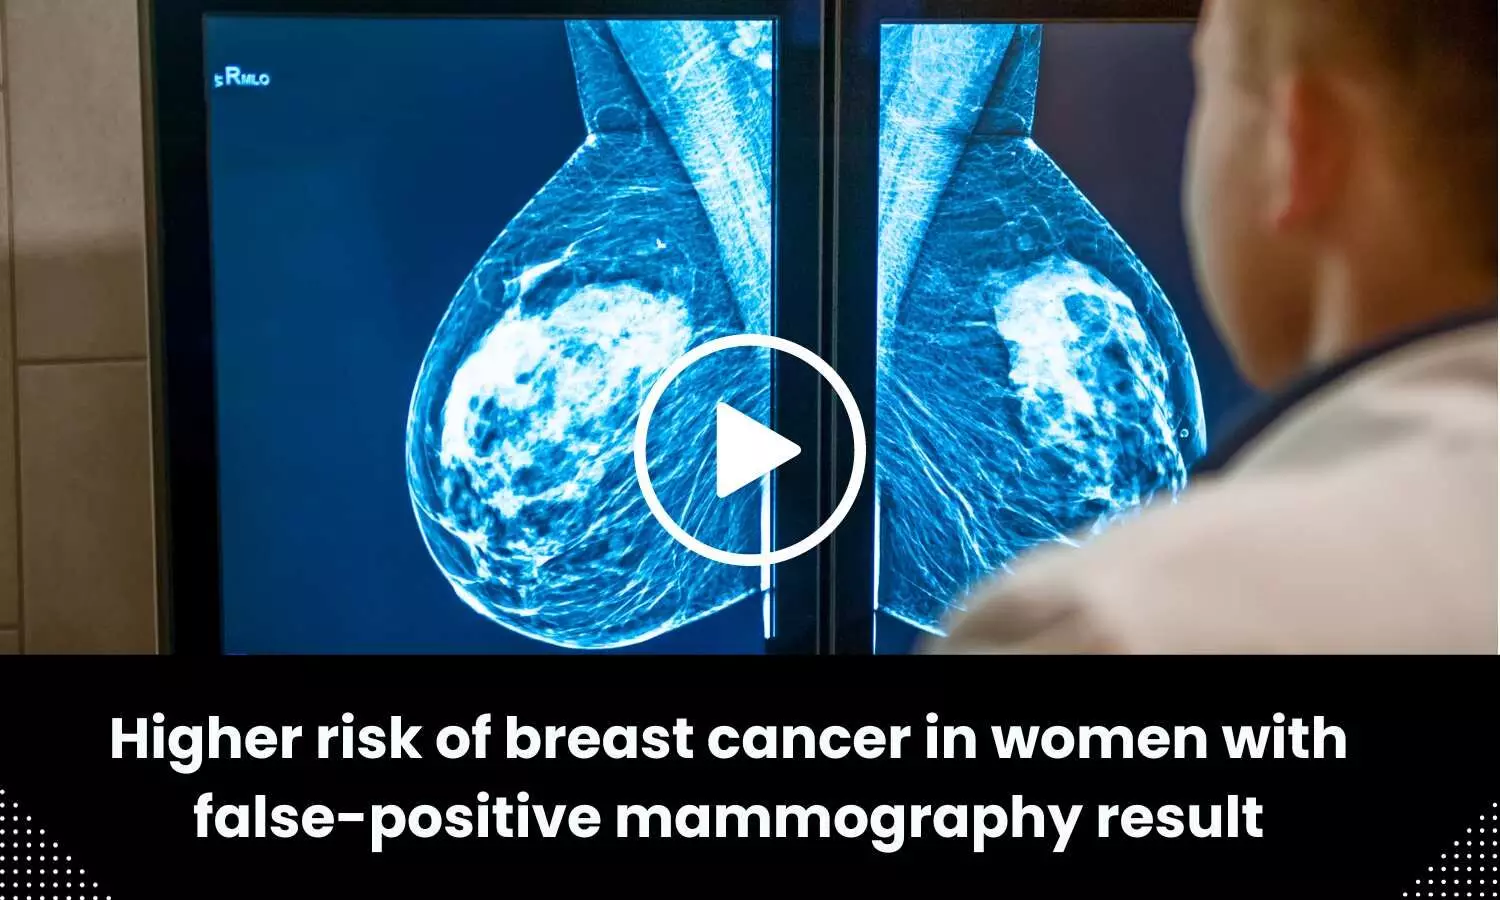 Higher risk of breast cancer in women with false-positive mammography result